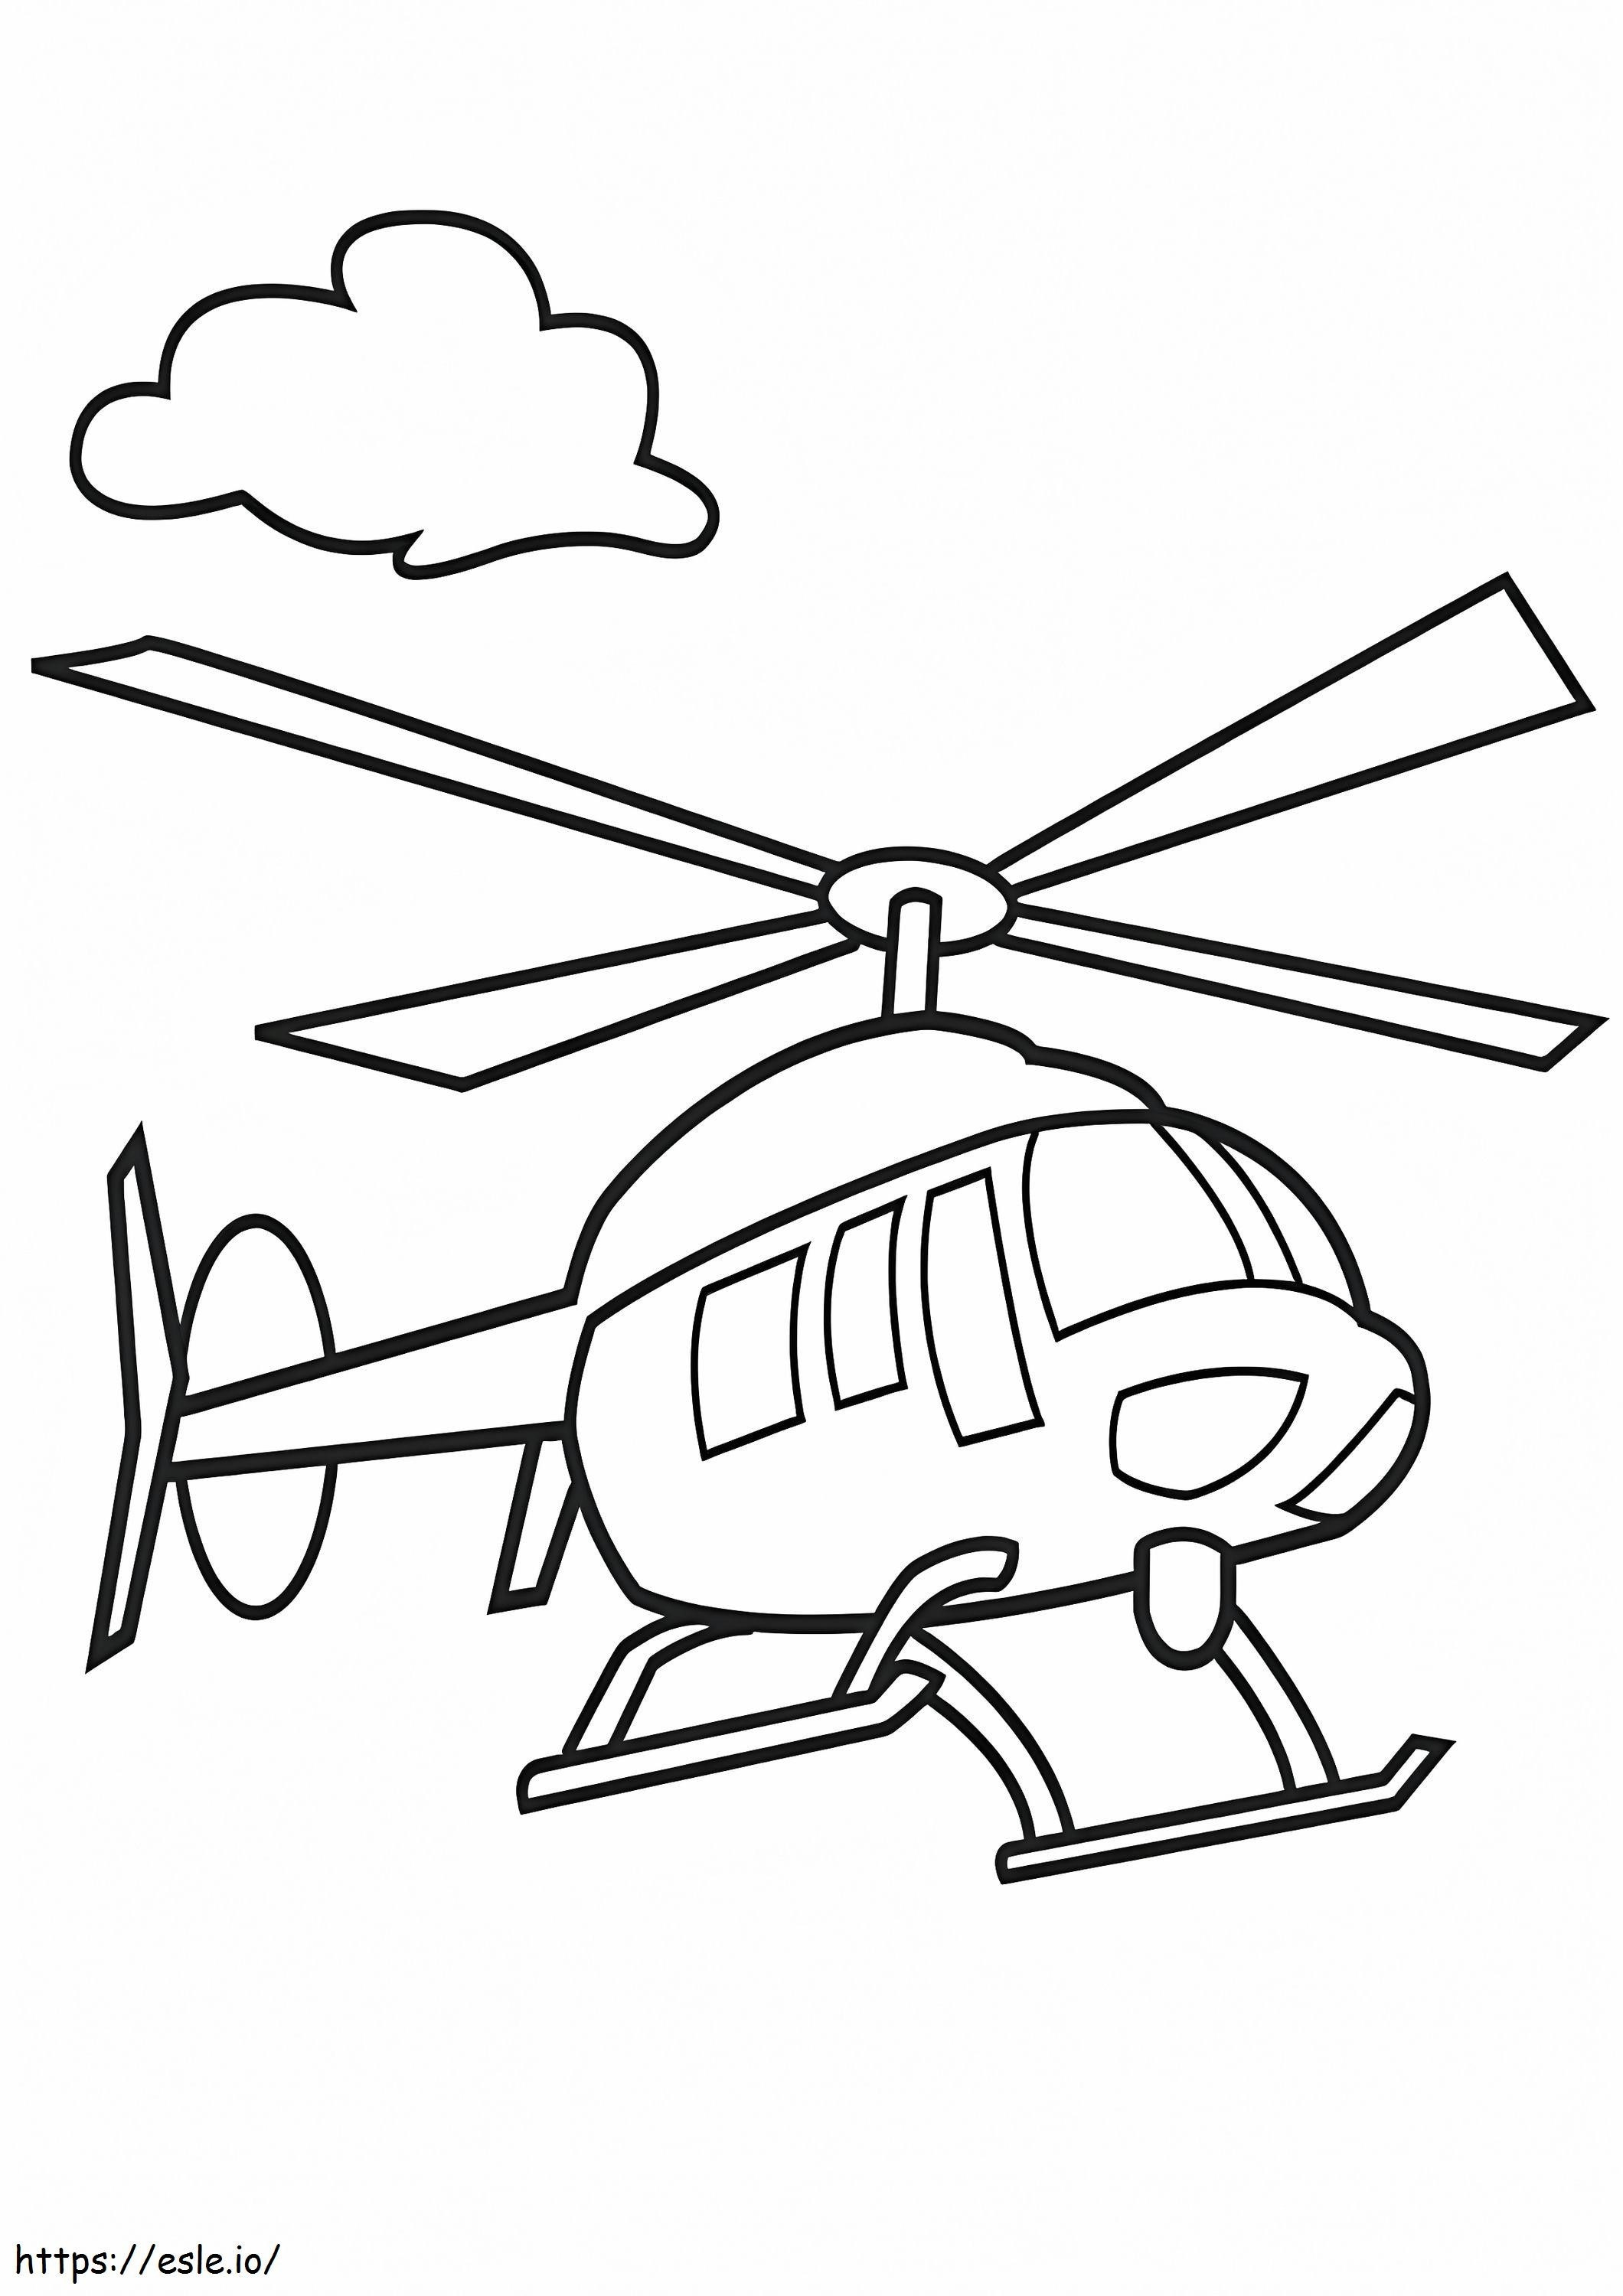 Helicopter 2 coloring page